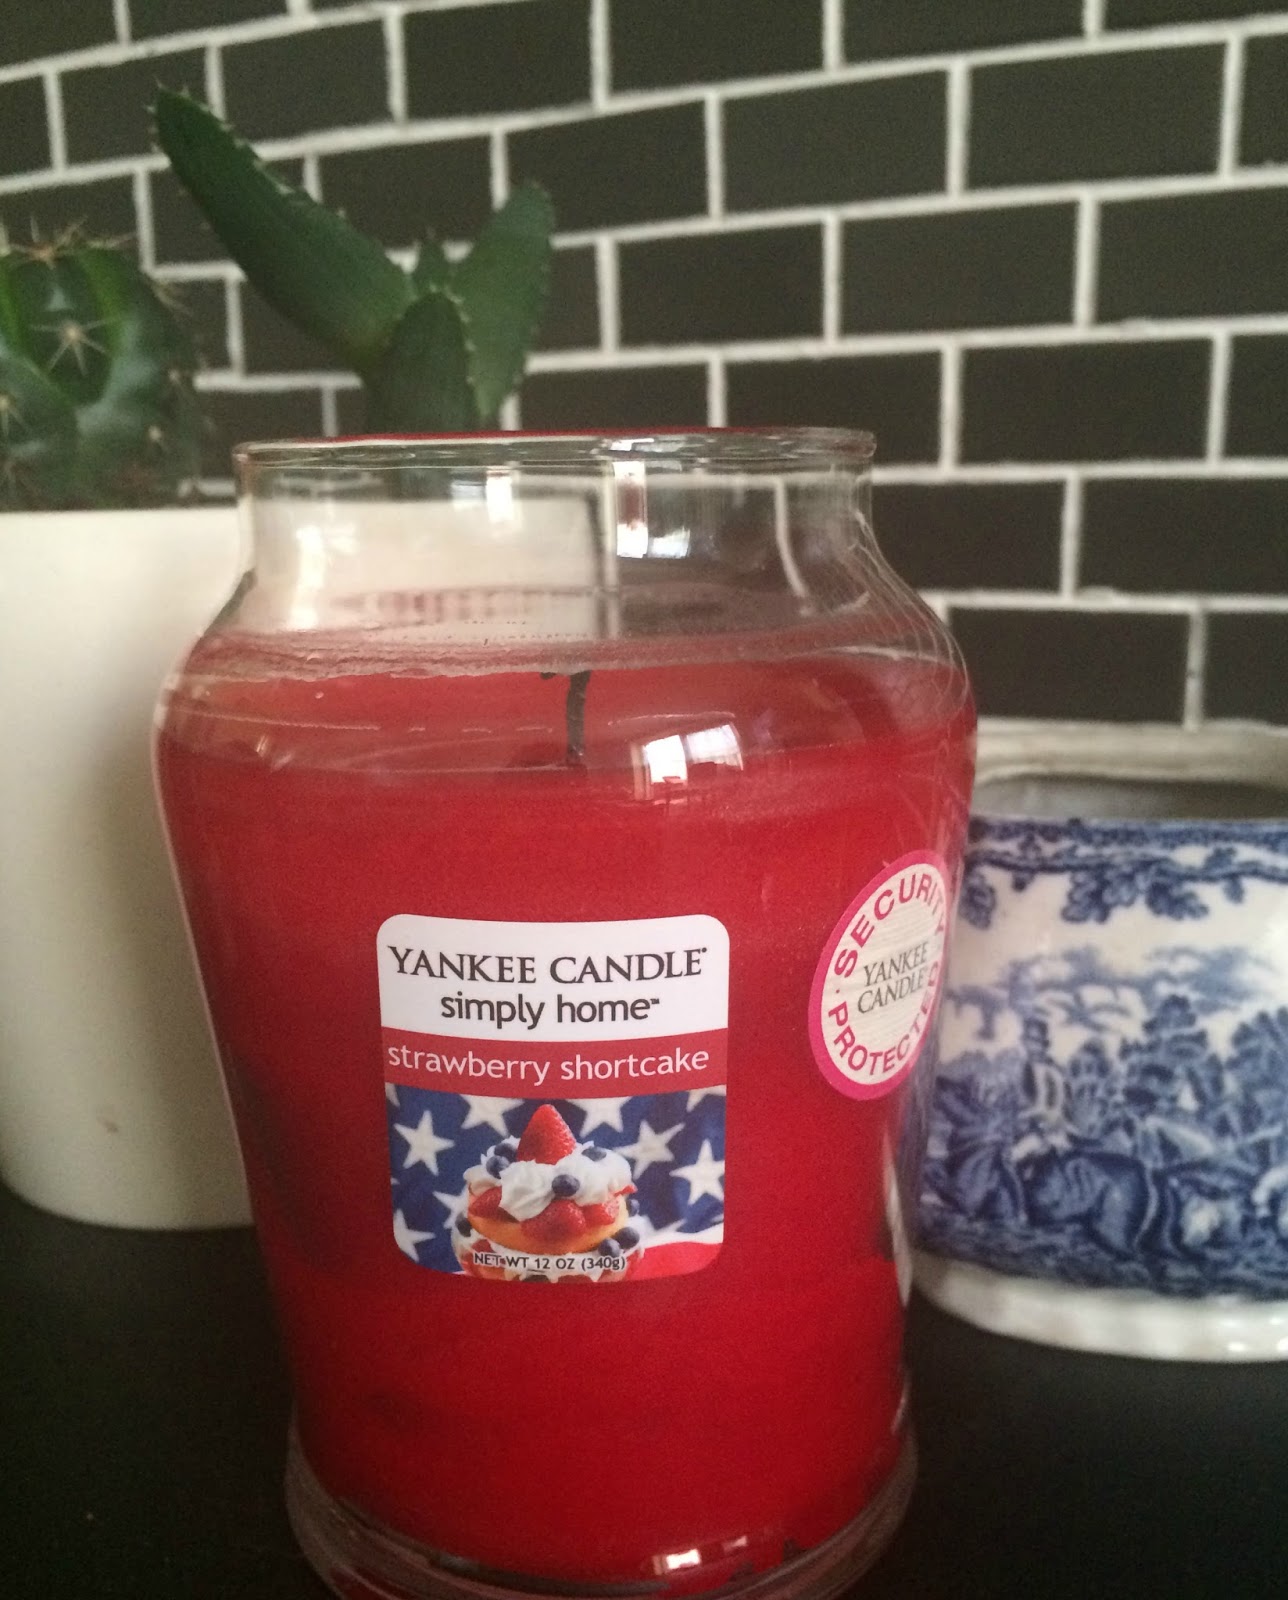 Yankee candle review strawberry shortcake 